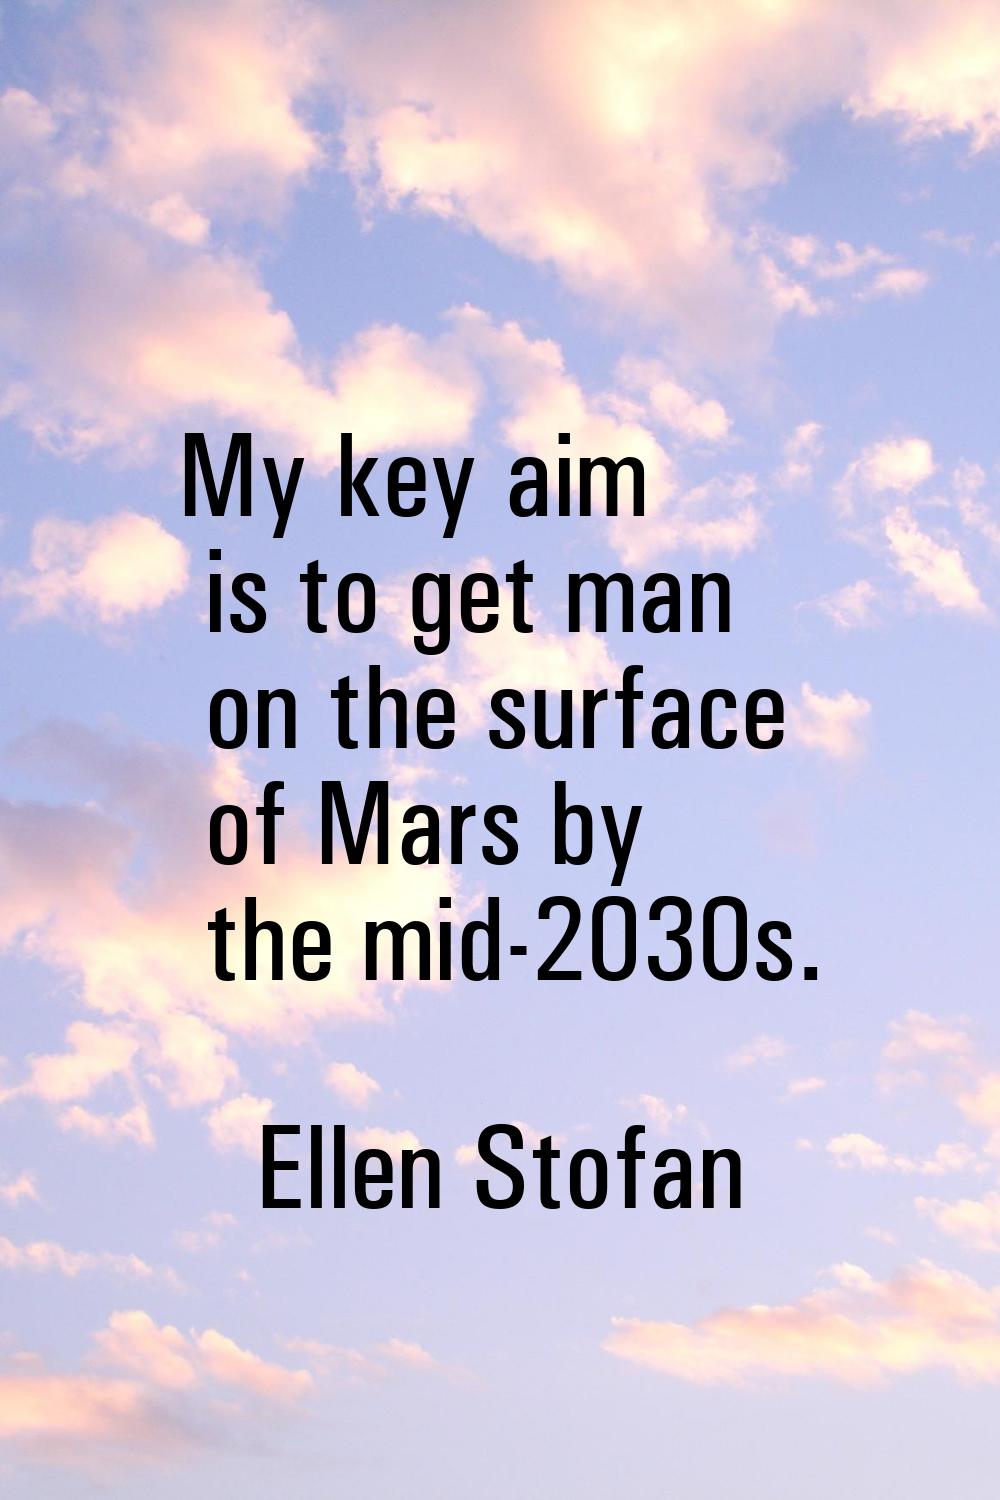 My key aim is to get man on the surface of Mars by the mid-2030s.